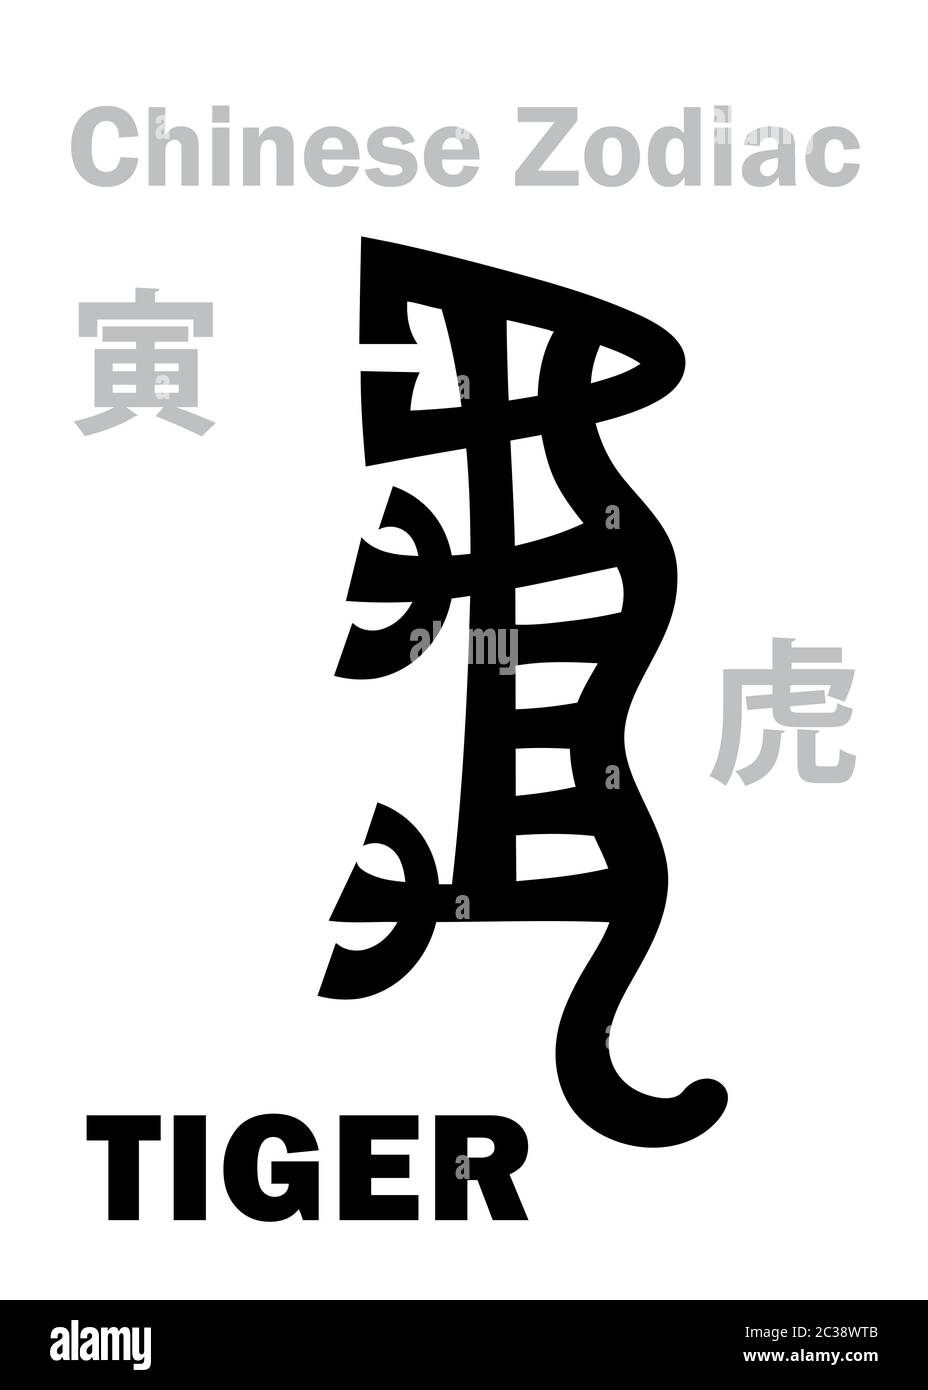 Astrology: TIGER (sign of Chinese Zodiac) Stock Photo